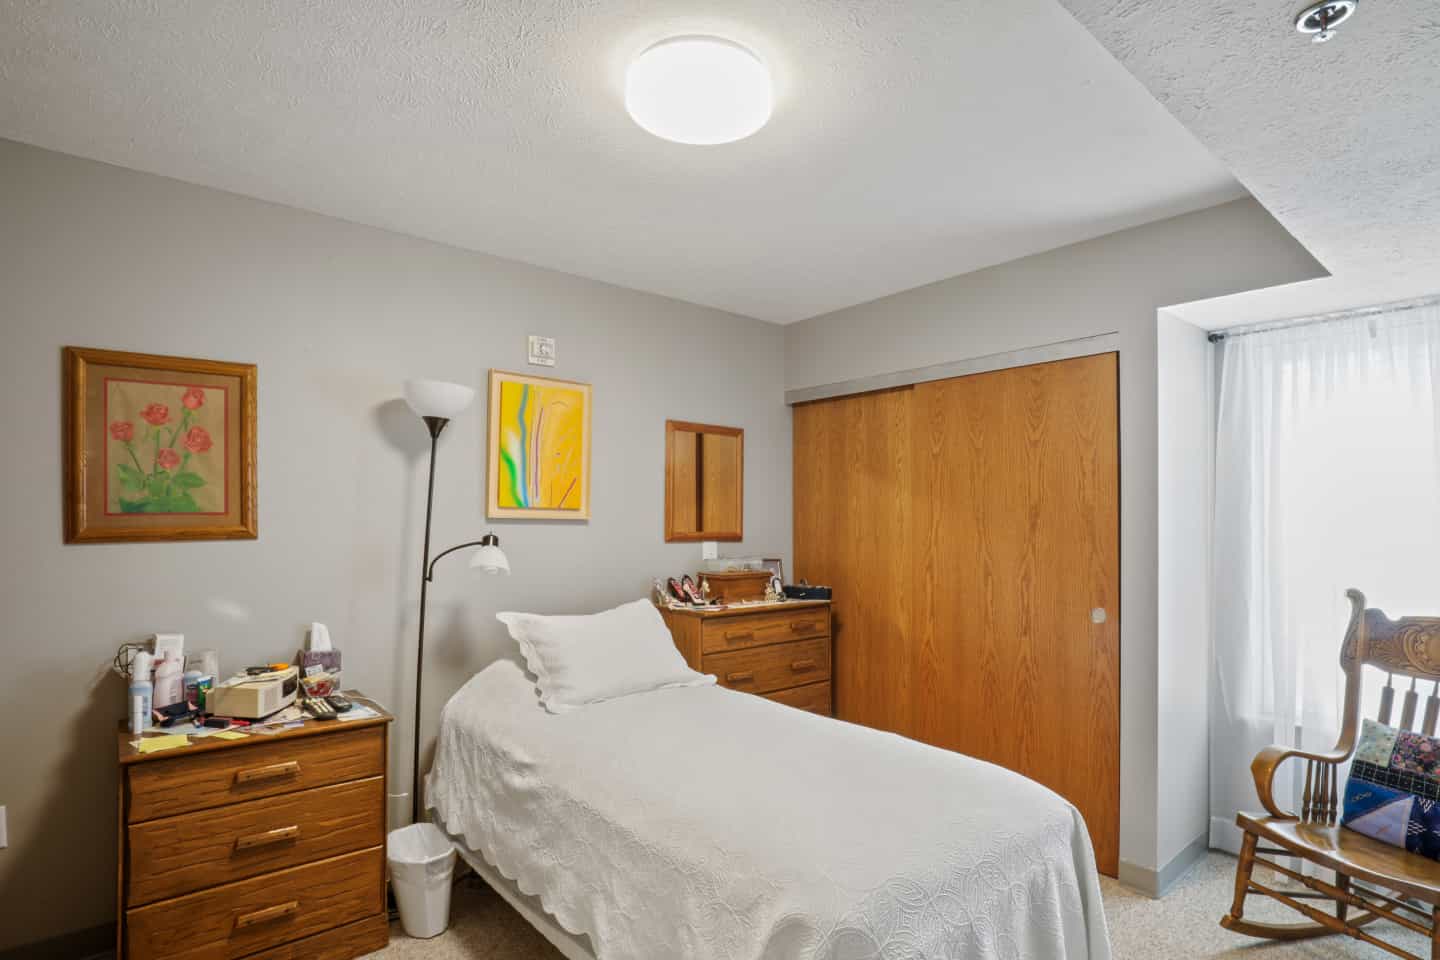 Assisted Living - One Bedroom Bedroom